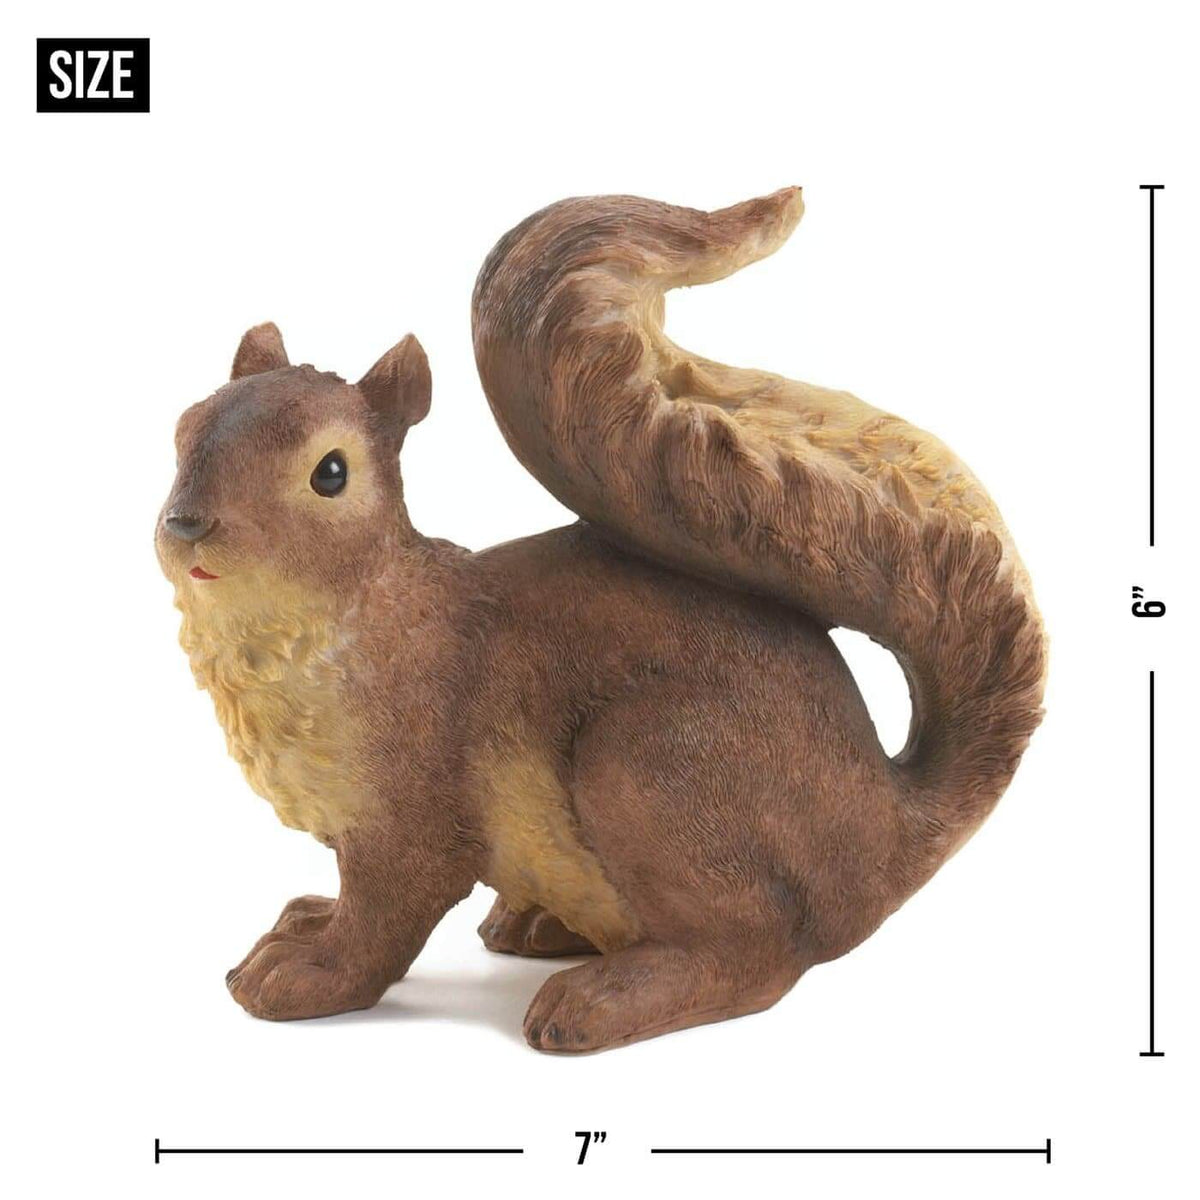 Curious Squirrel Garden Statue - The House of Awareness